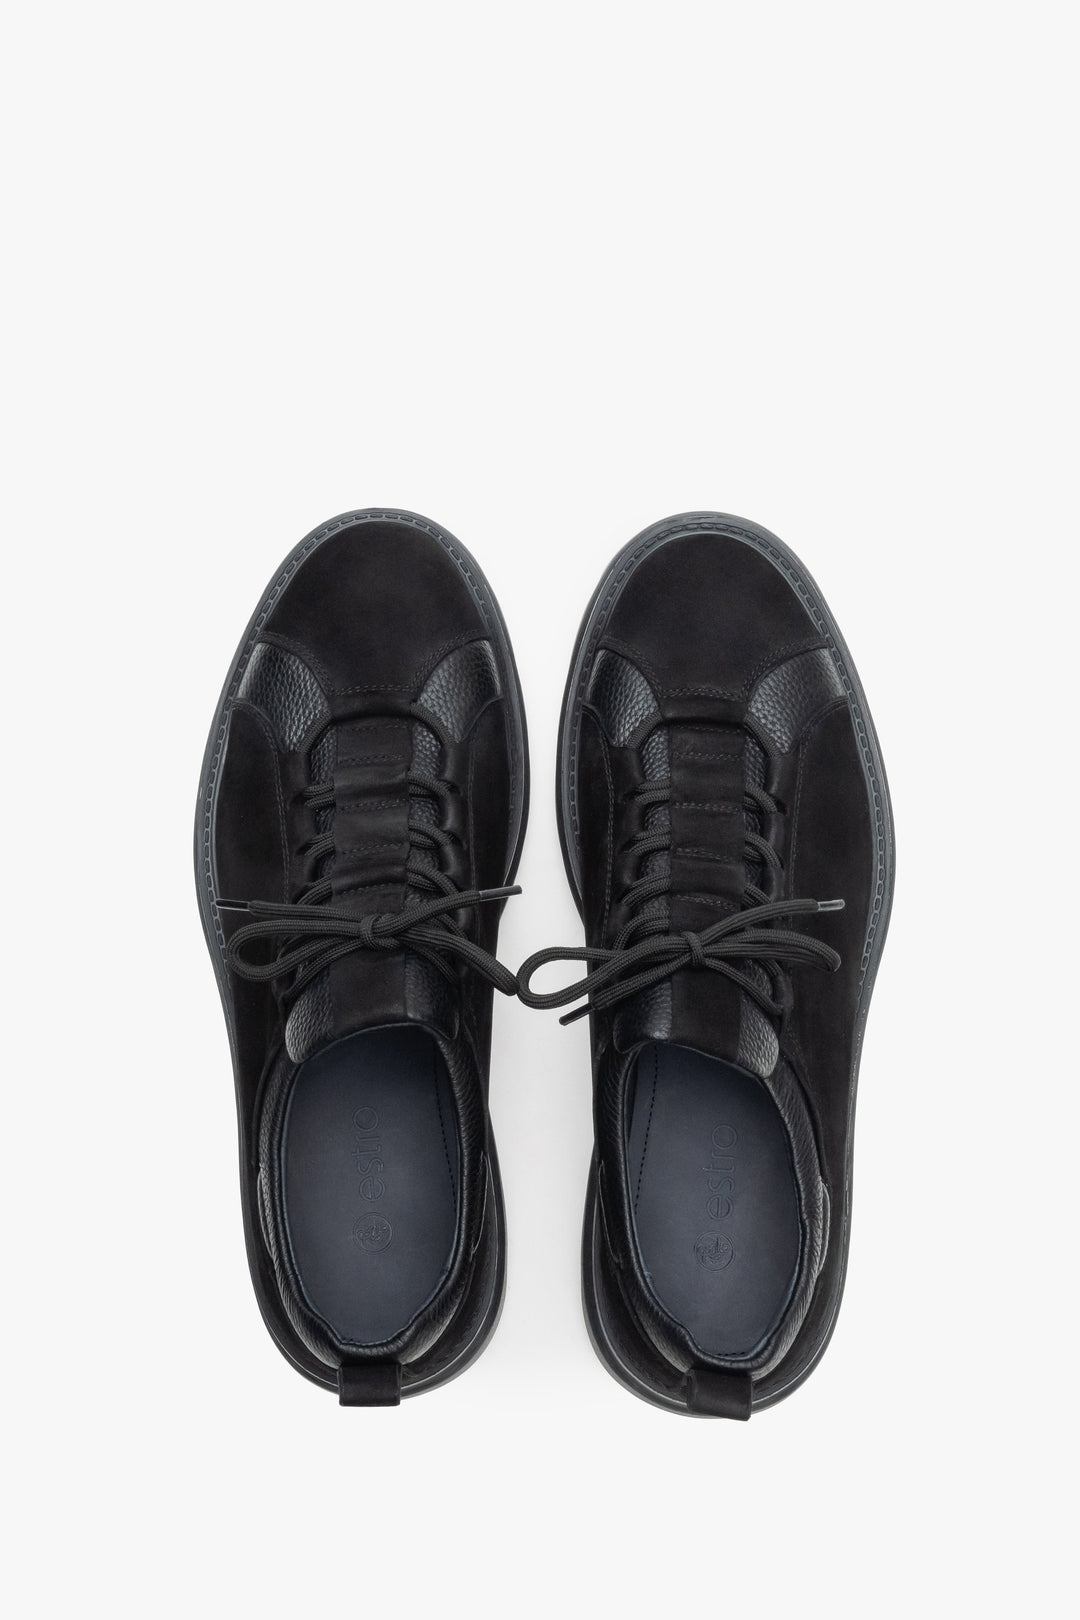 Men's black leather and nubuck sneakers with elastic lacing - top view presentation of the model.